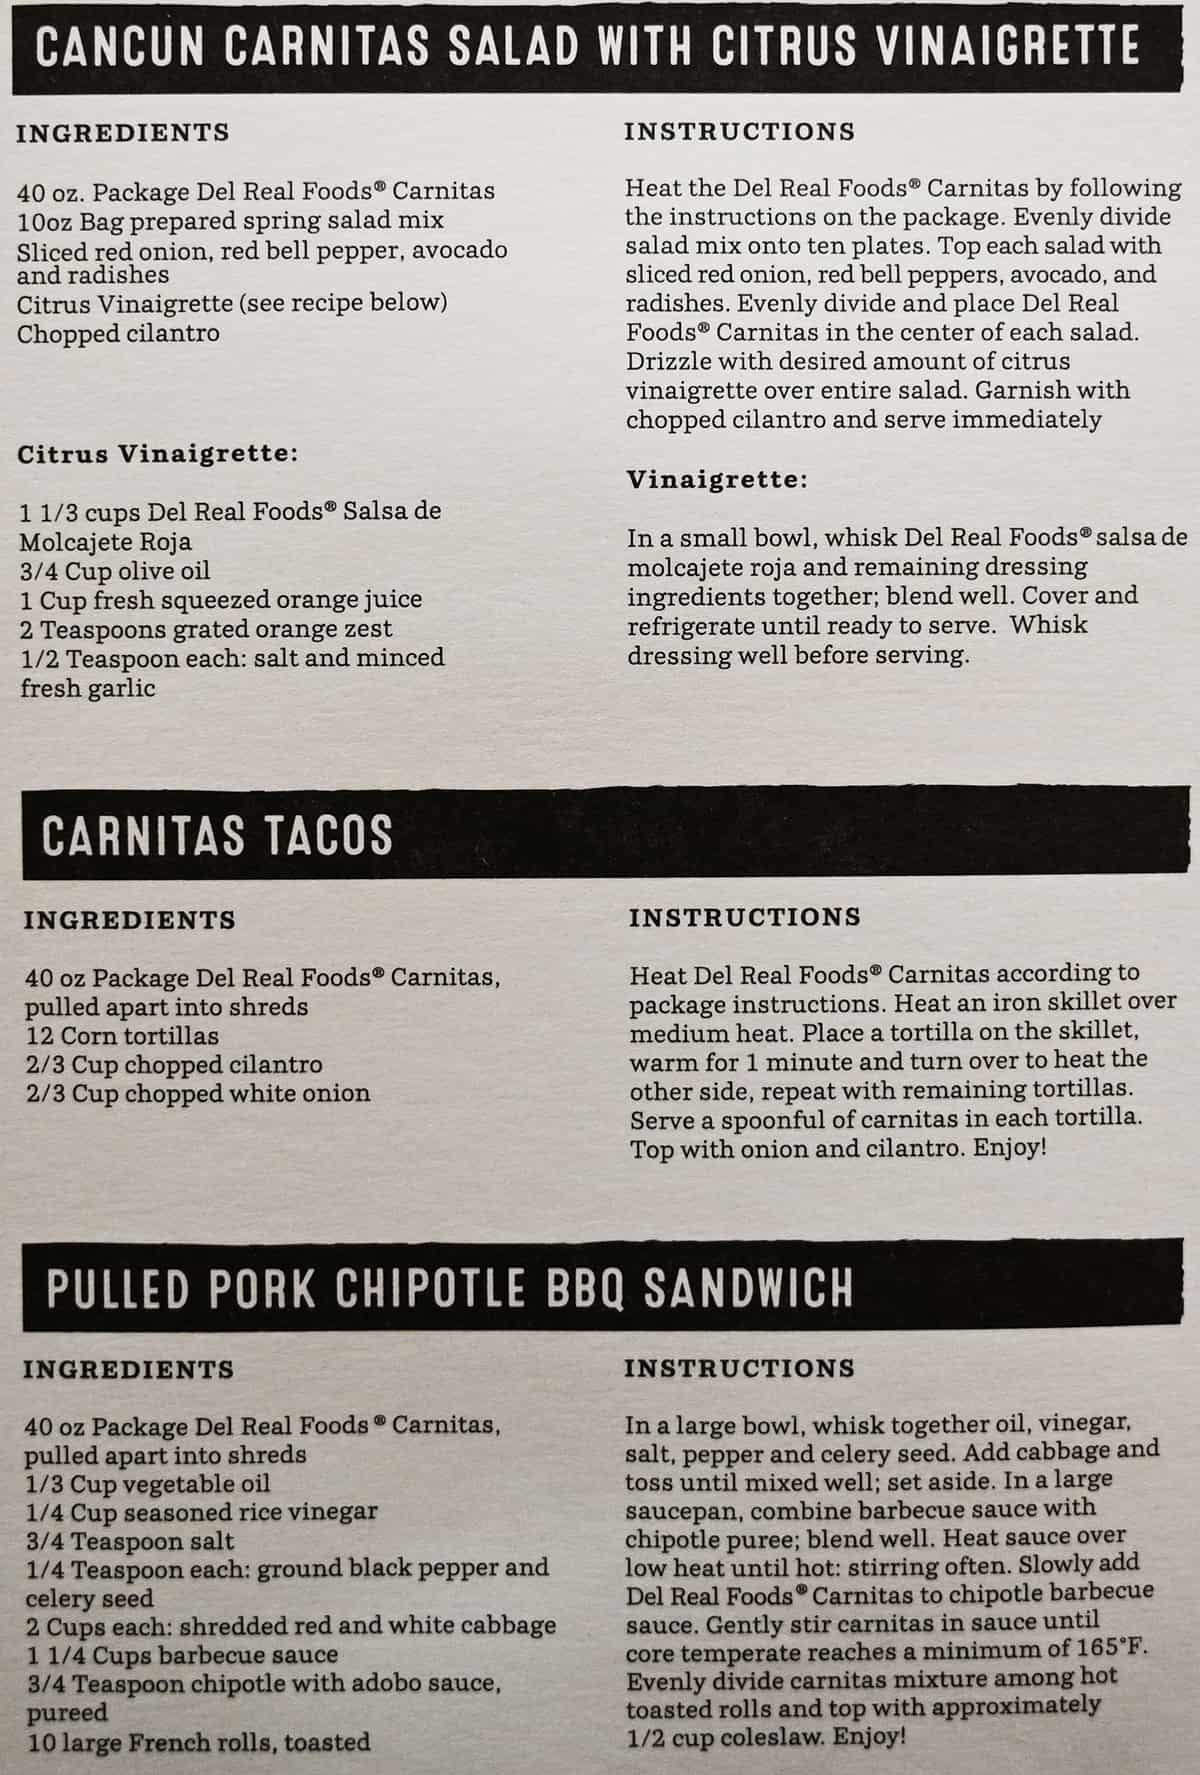 Image of recipe ideas for how to use the carnitas from the back of the box.